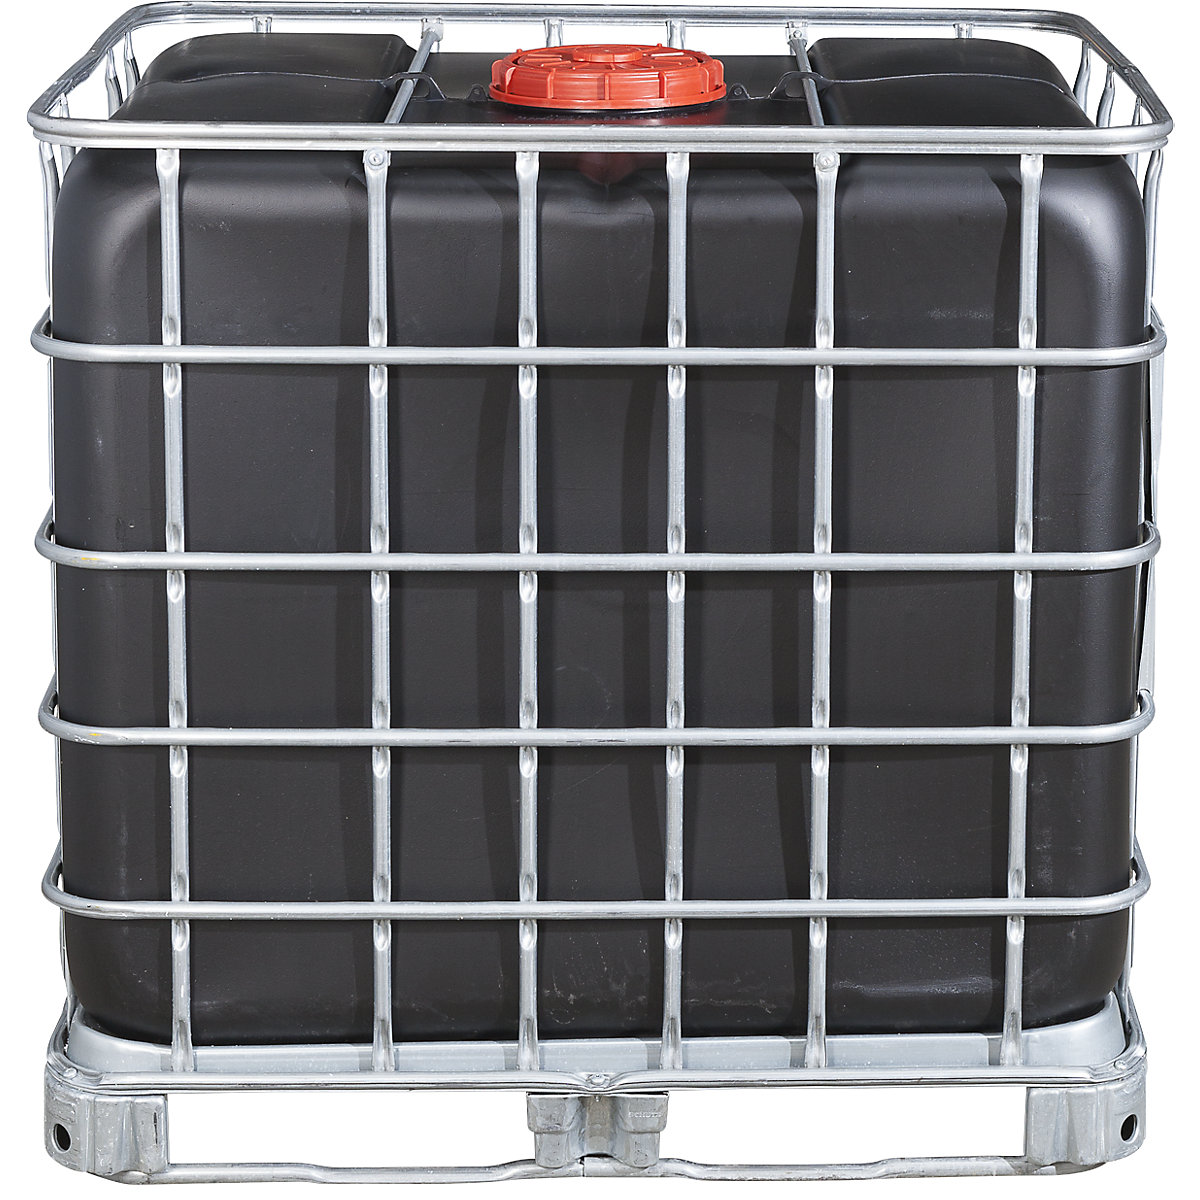 RECOBULK IBC container with UV protection, UN approval (Product illustration 2)-1